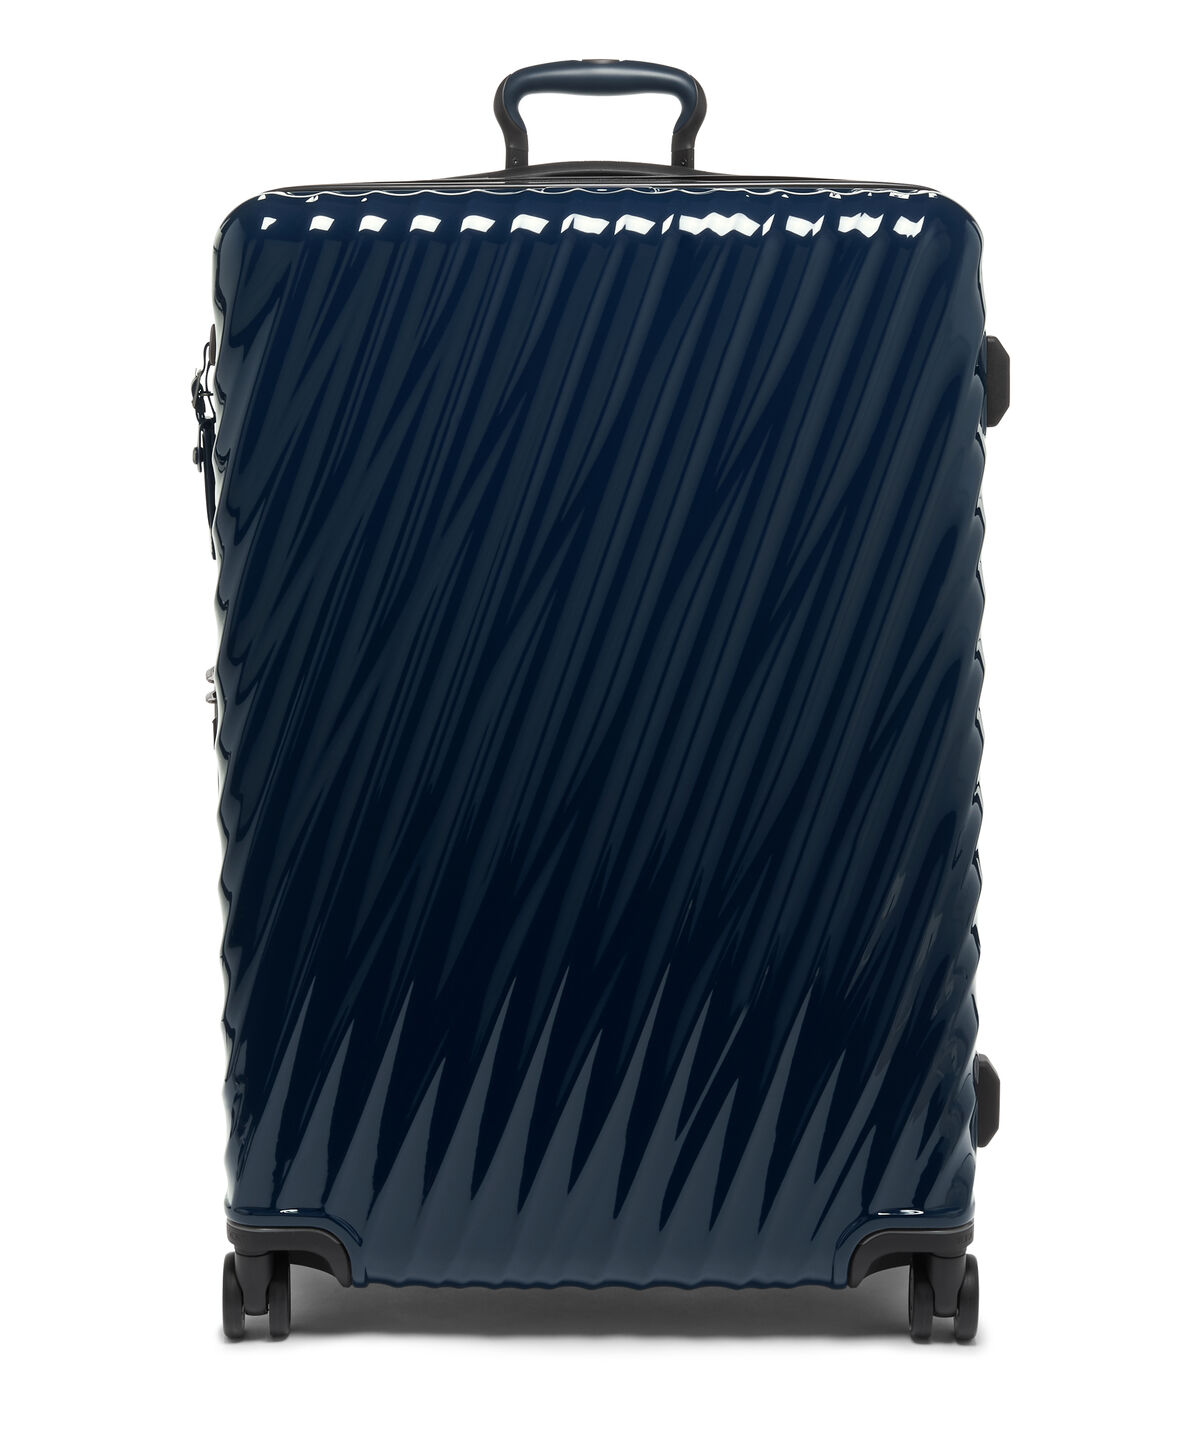 TUMI 19 Degree Navy Ext Trip Exp Packing Case 139686-1596